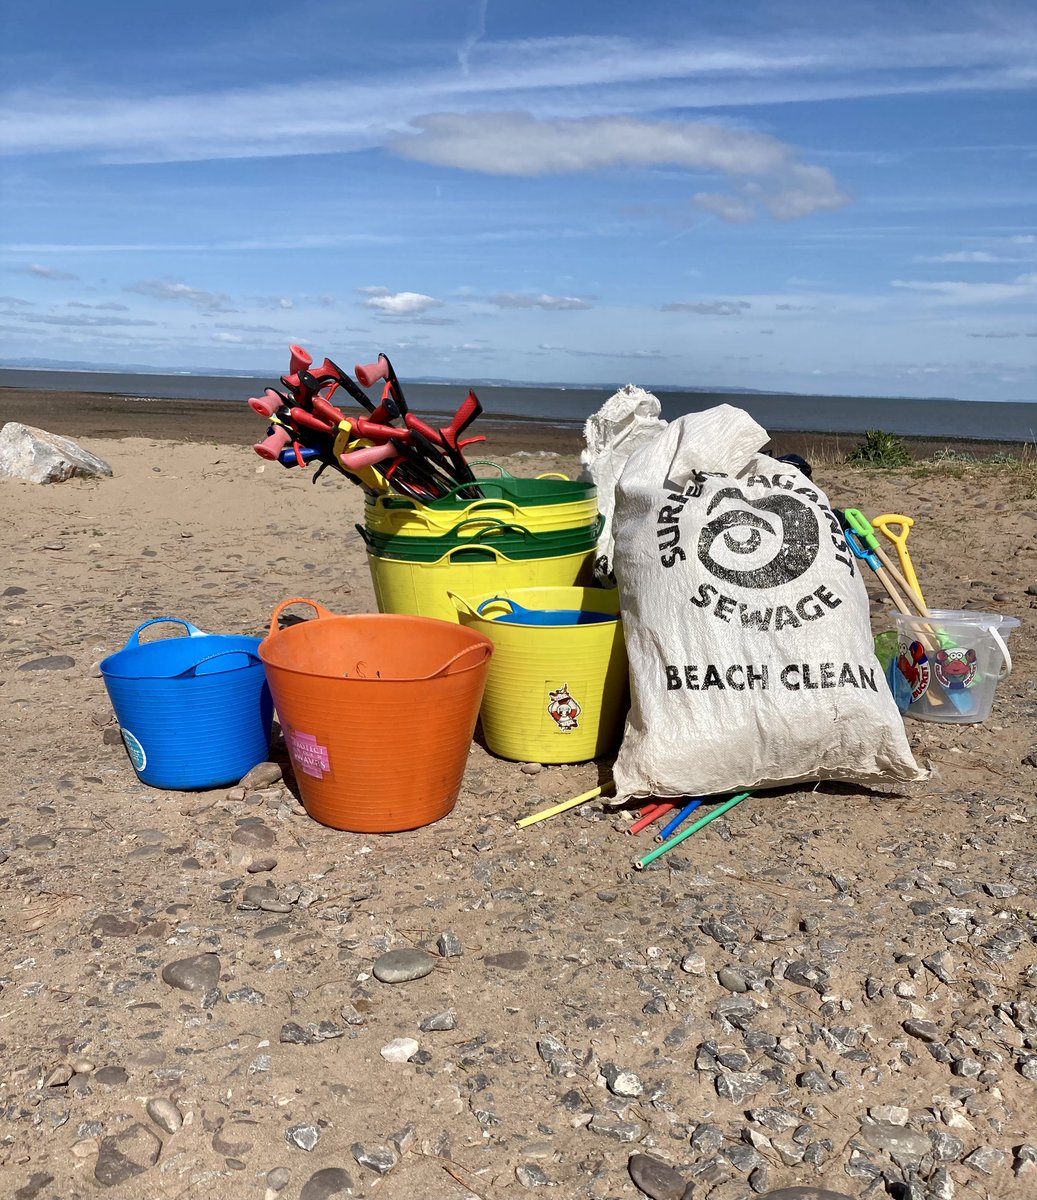 Join the Plastic Free Communities in West Somerset for one of their September beach cleans!

🌊Minehead -Sat 16th ➡️ bit.ly/47Xzm21
🌊Dunster -Sun 17th ➡️ bit.ly/47ReNEu
🌊Watchet -Sat 23rd ➡️ bit.ly/45AyoXl

#GreatBritishBeachClean #SpruceUpTheSevern